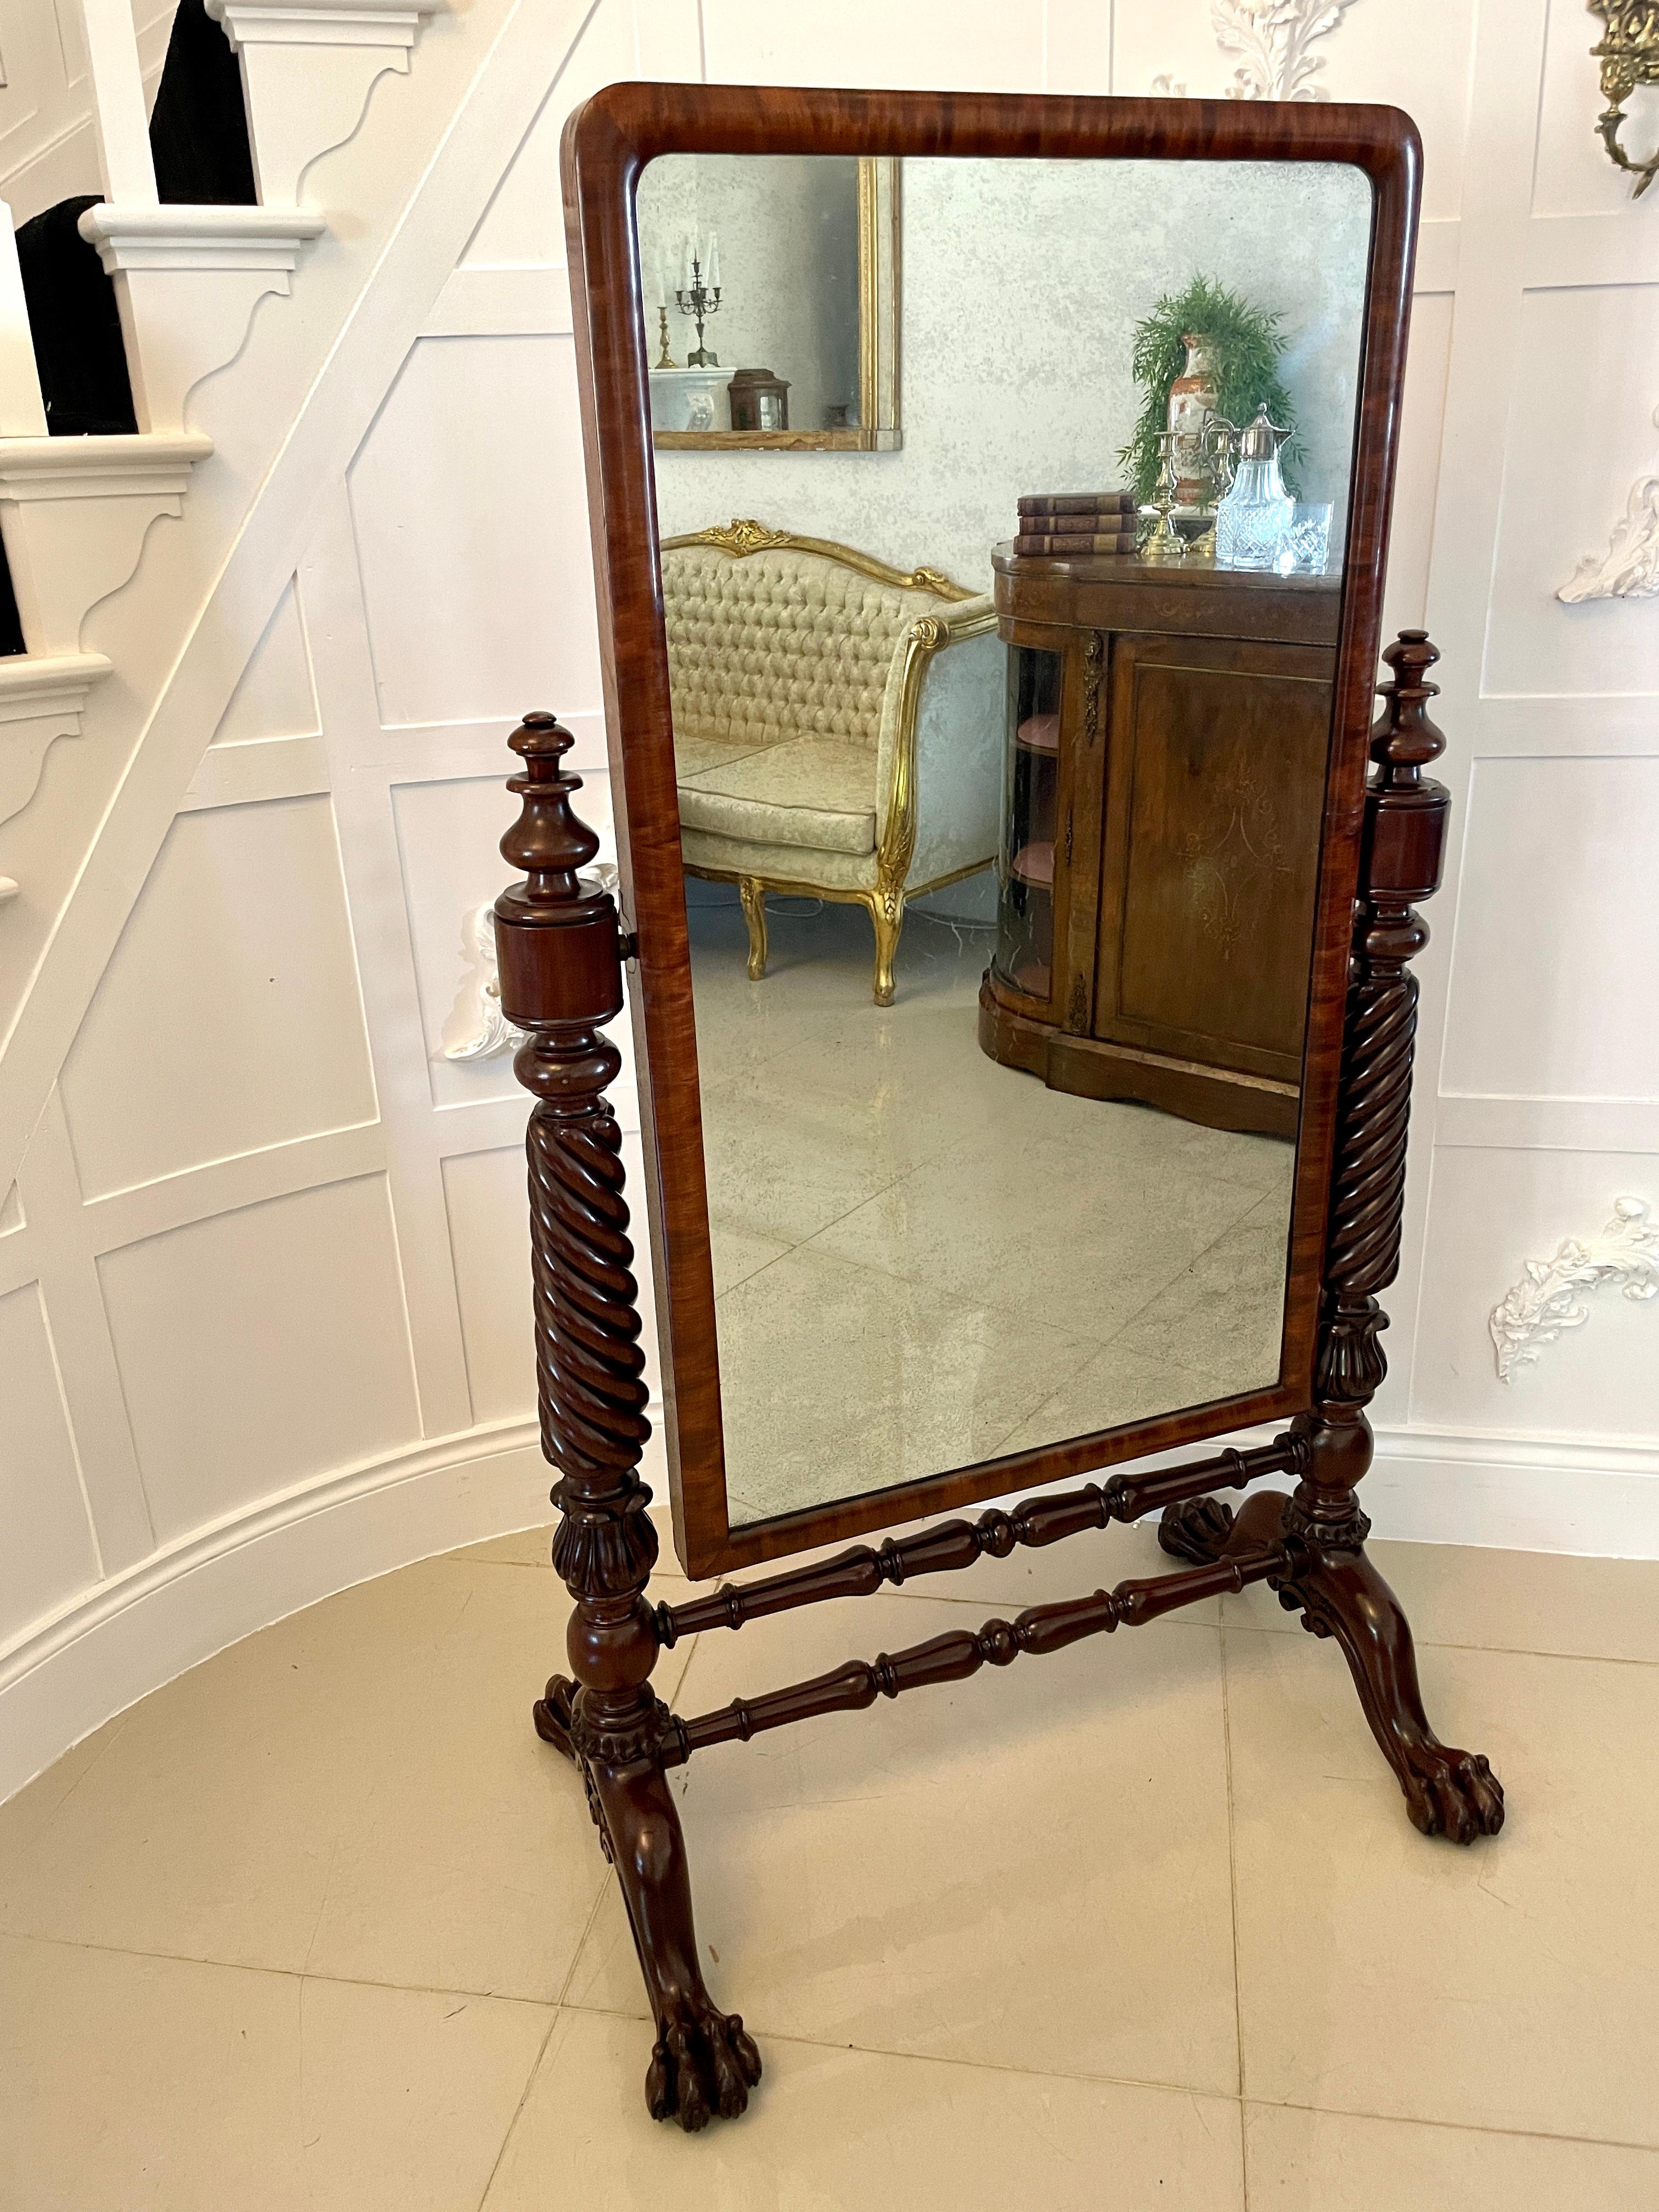 Superb quality antique William IV mahogany cheval mirror having a mahogany framed adjustable cheval mirror supported by superb quality rope twist carved column supports standing on carved mahogany shaped cabriole legs with claw feet united by two